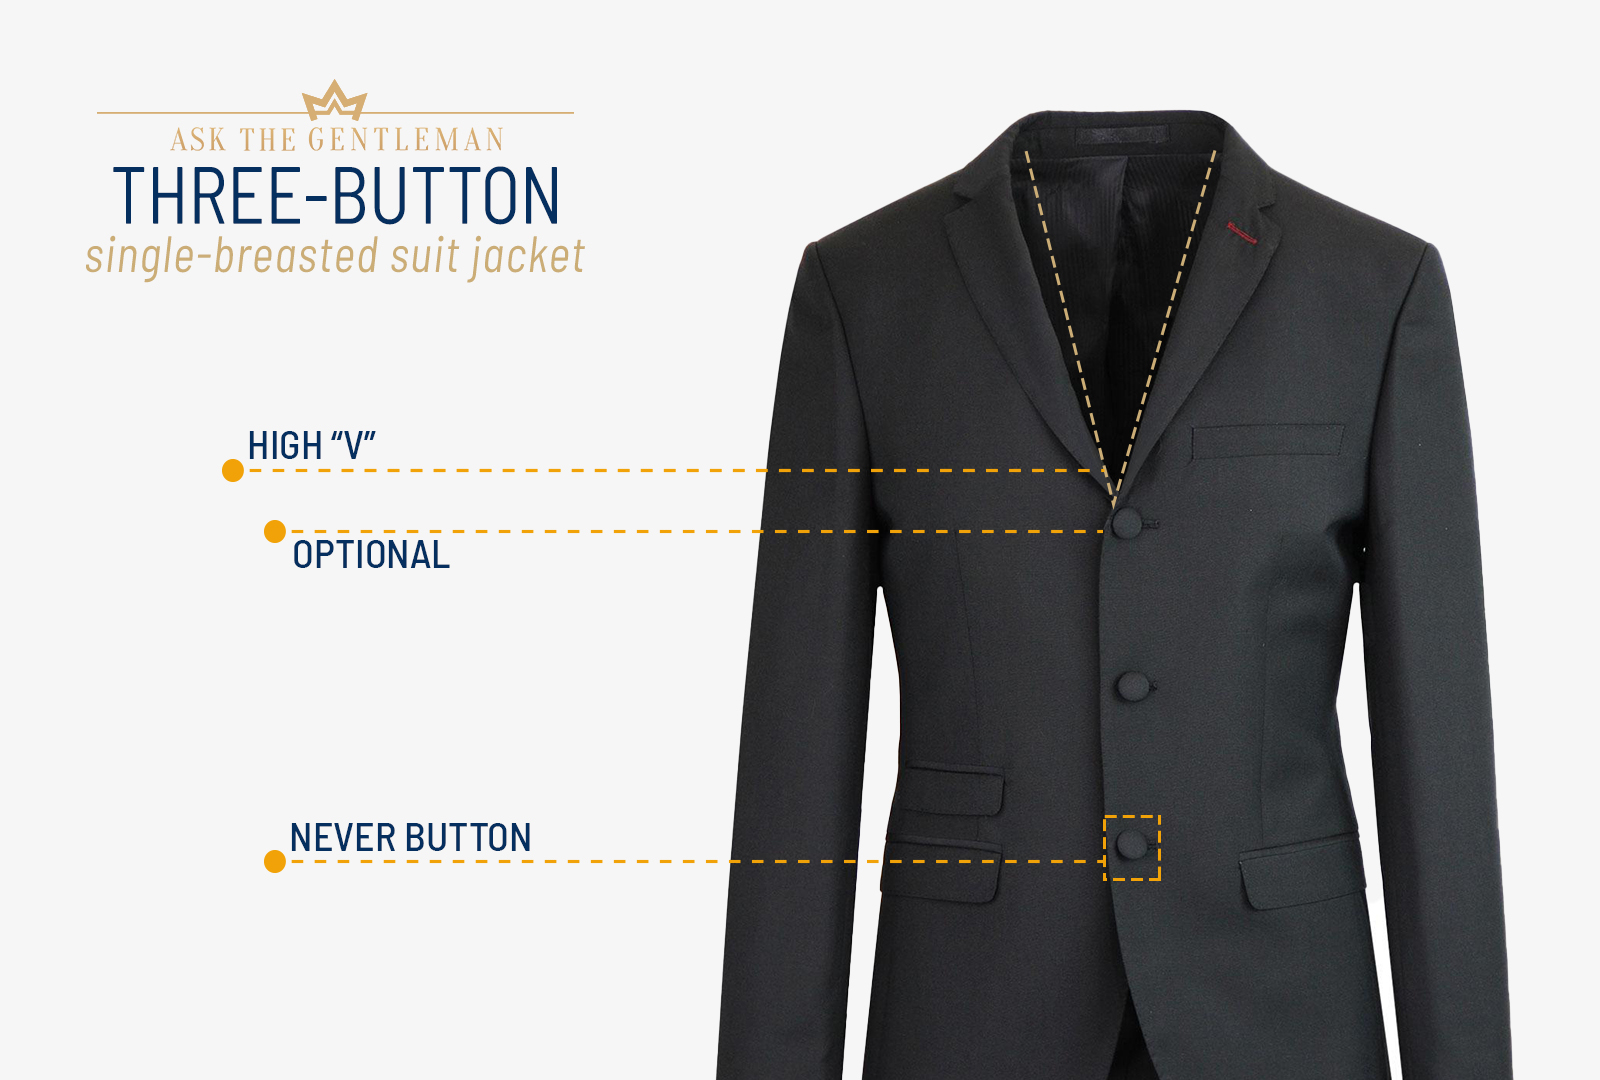 Three-button single-breasted suit jacket style